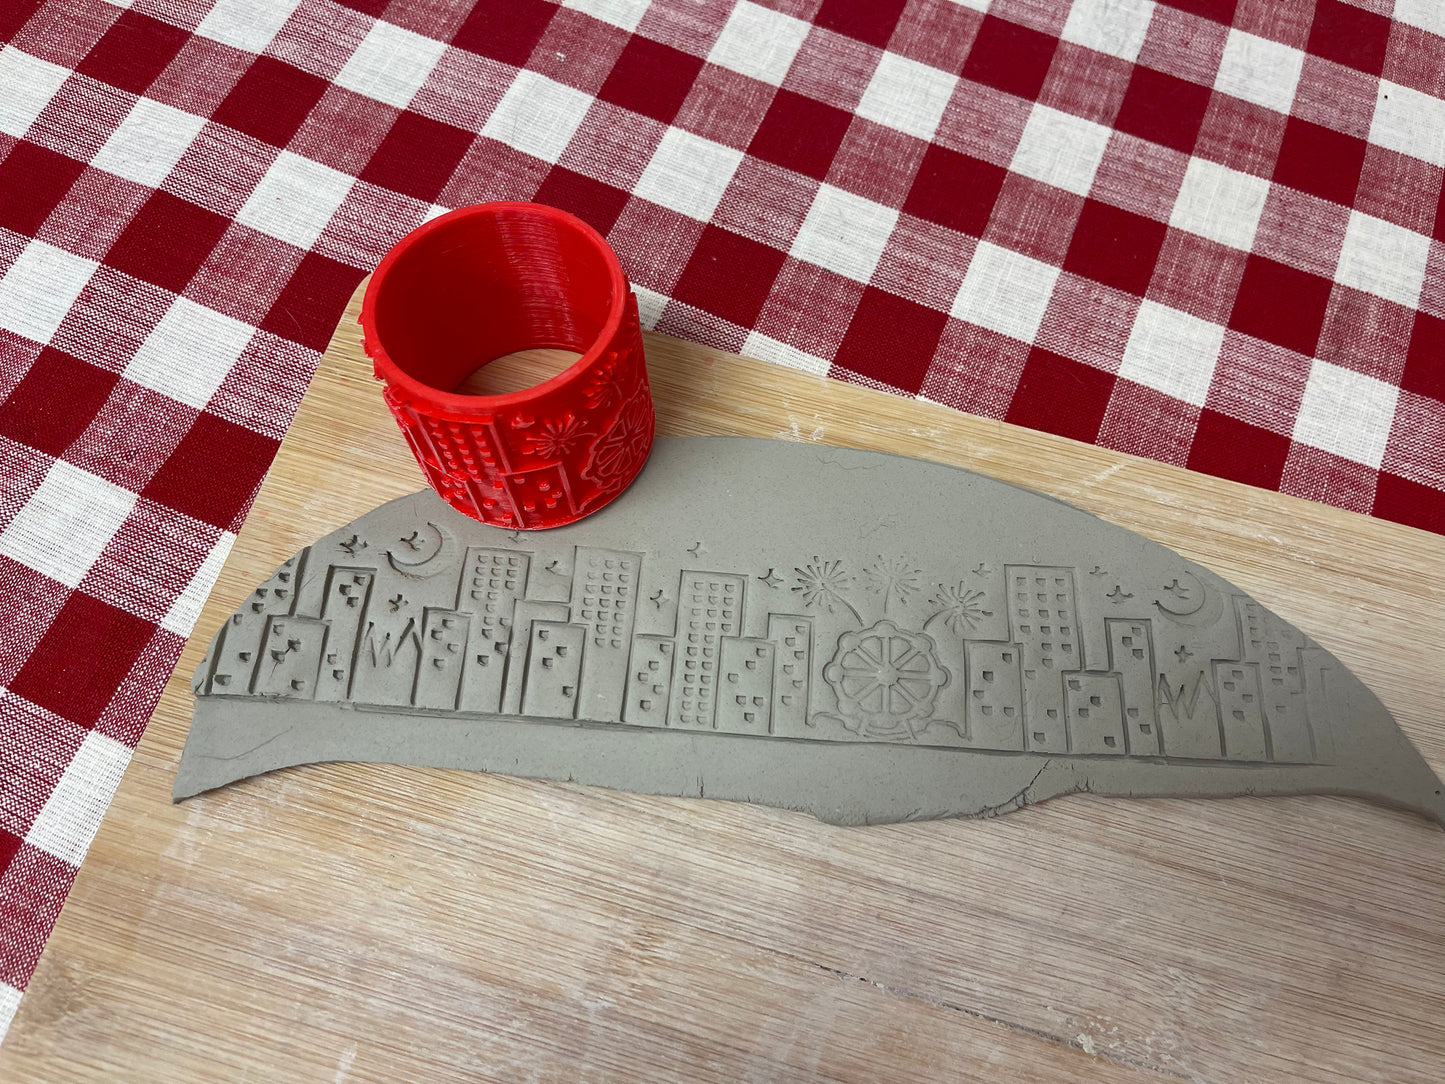 City Scape Texture Roller - from the March 2023 mystery box, repeating pattern, plastic 3D printed